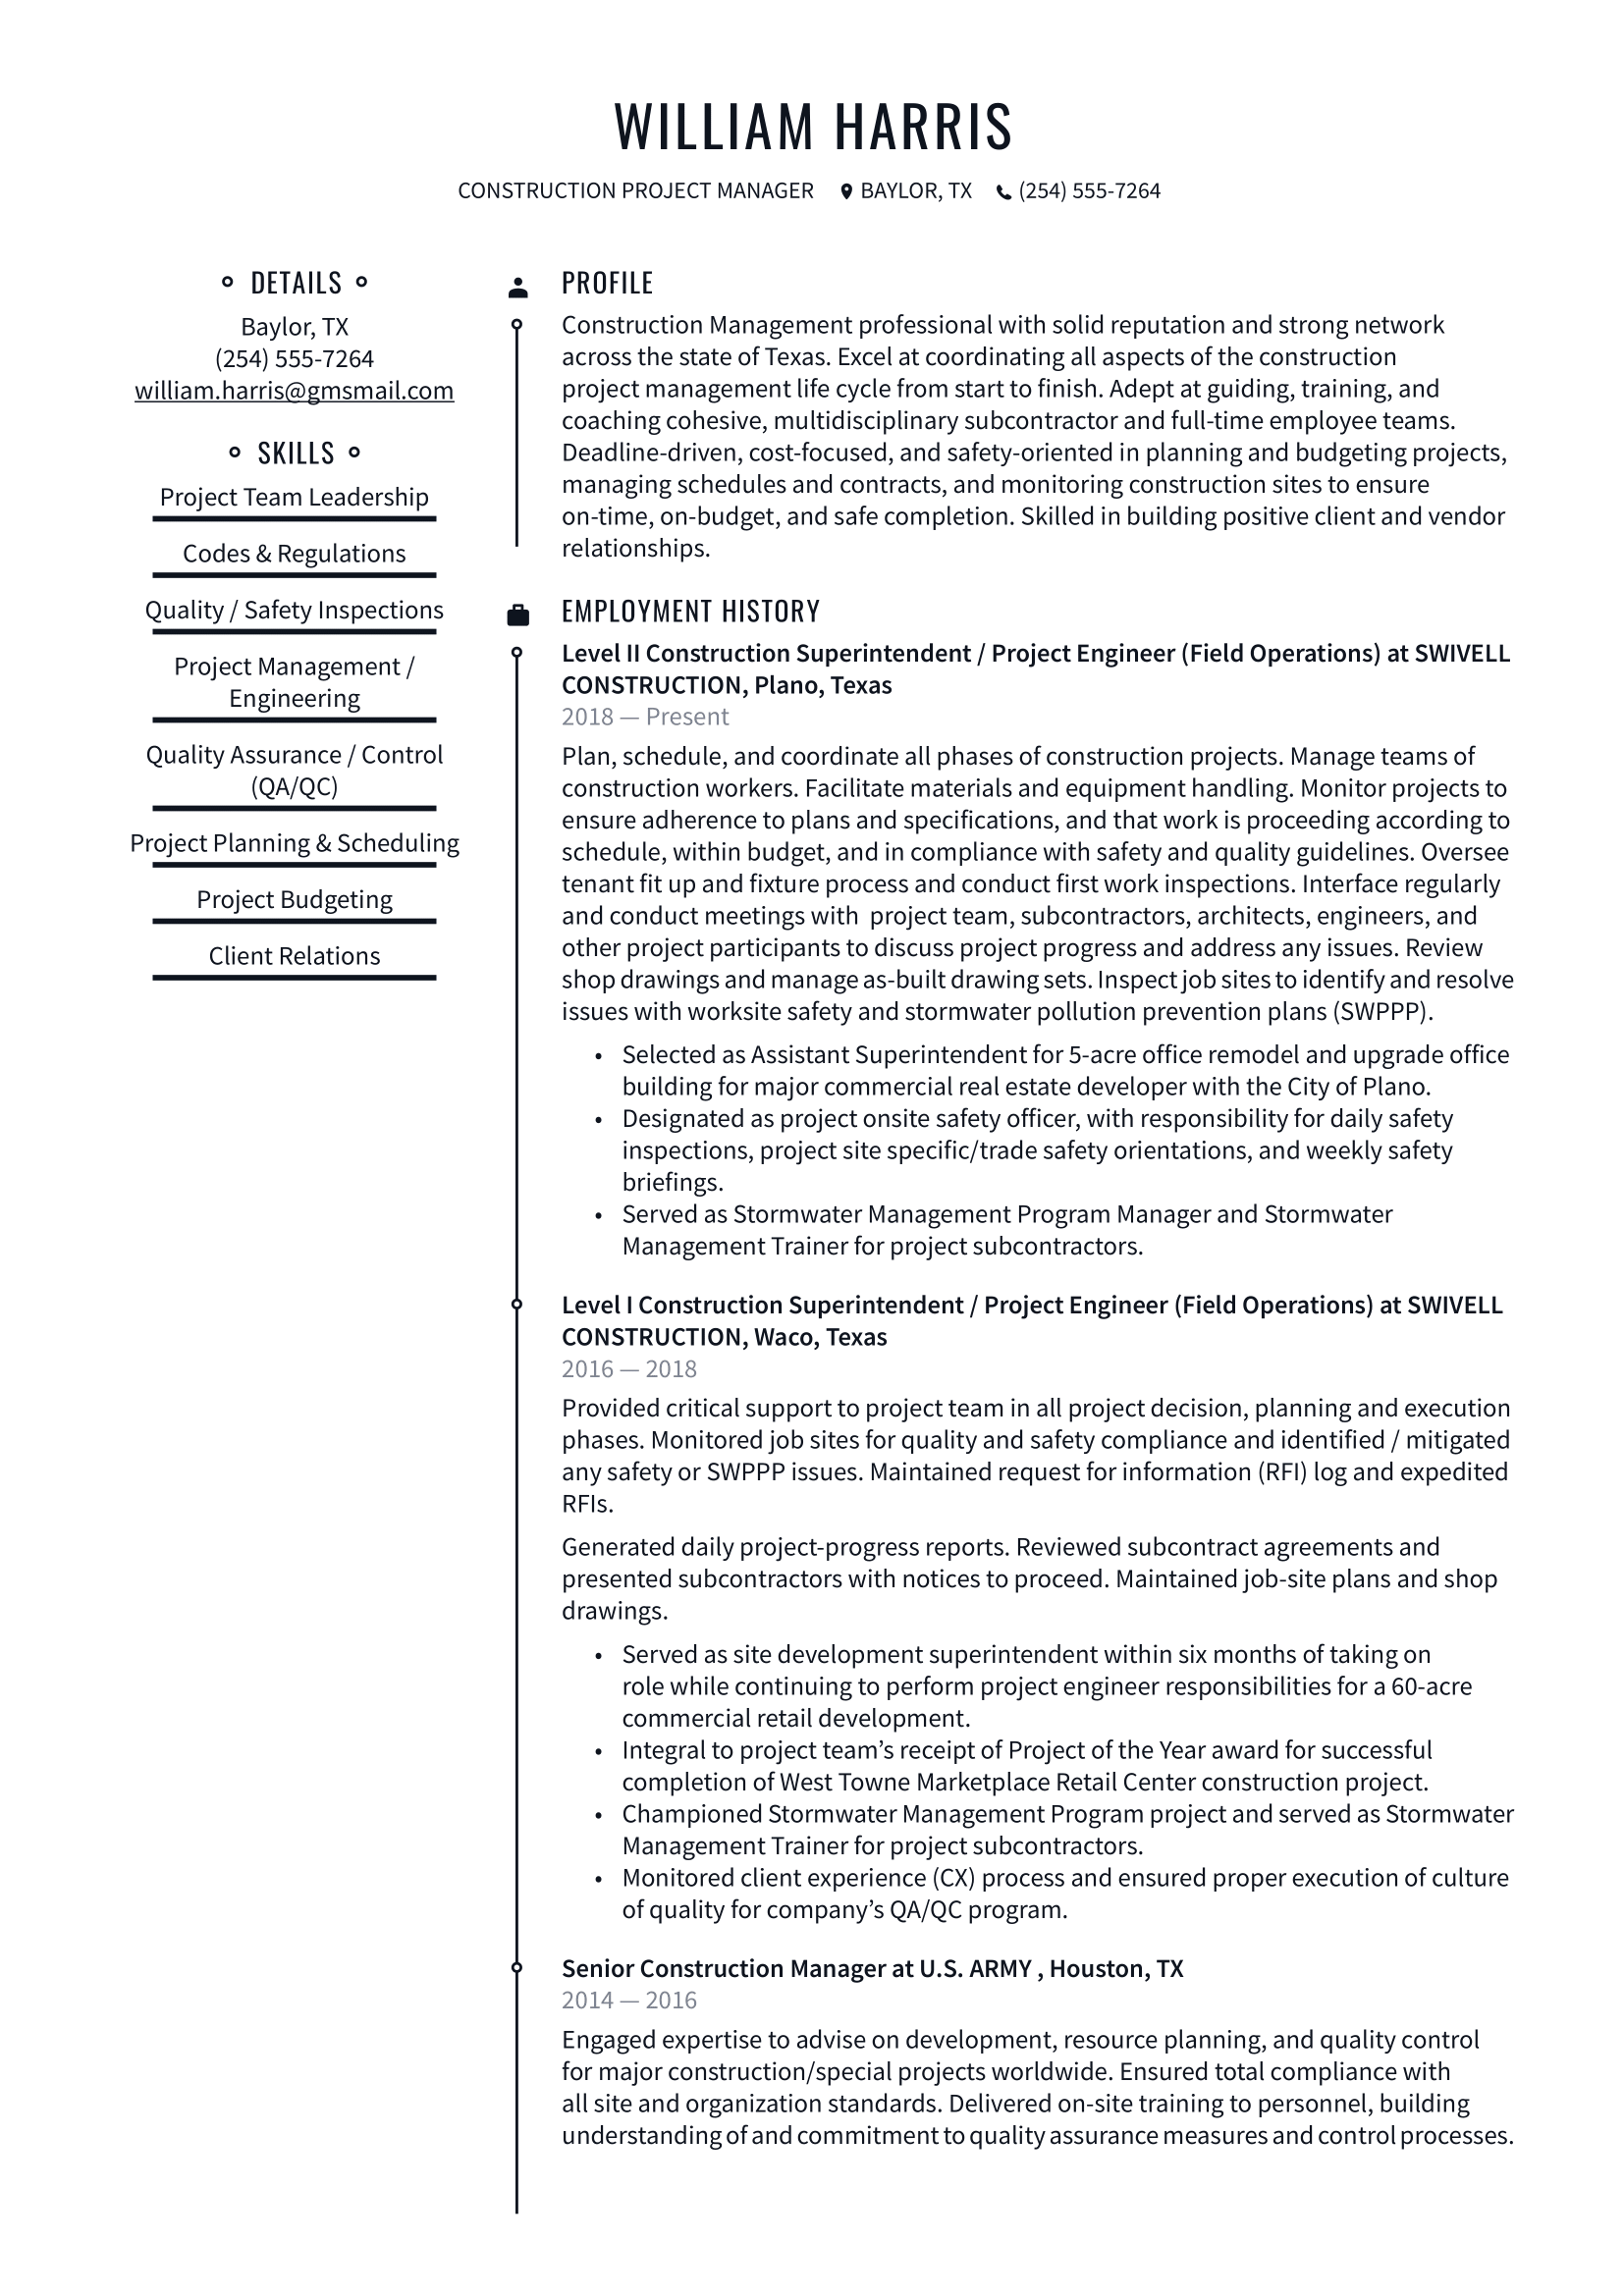 Construction_Project_Manager-Resume-Example.png